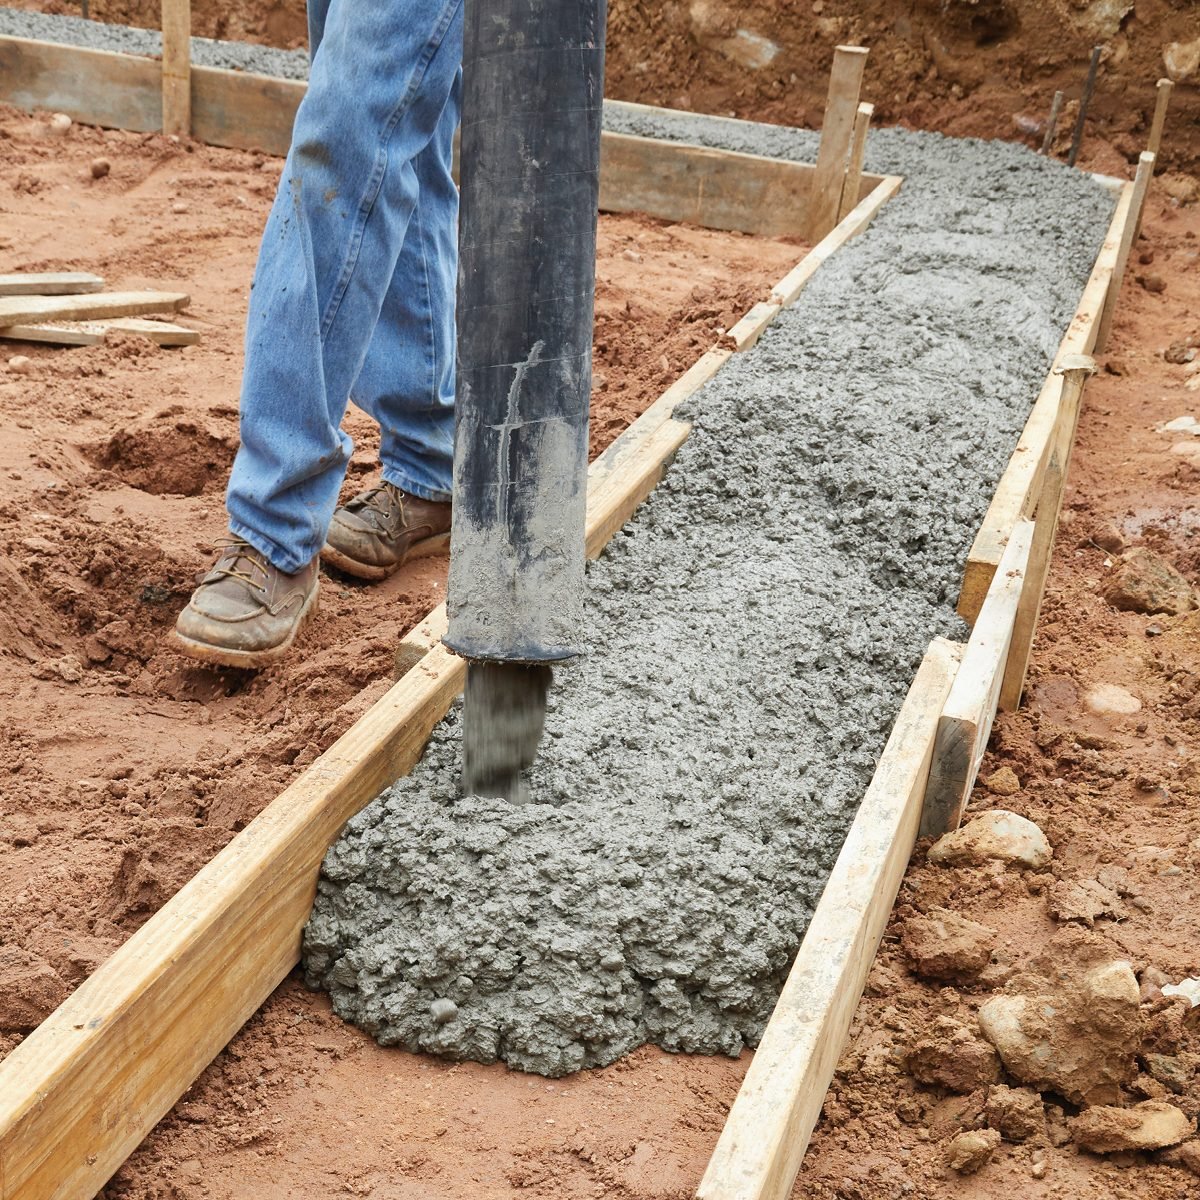 What Goes Into Pouring a Strong Foundation?